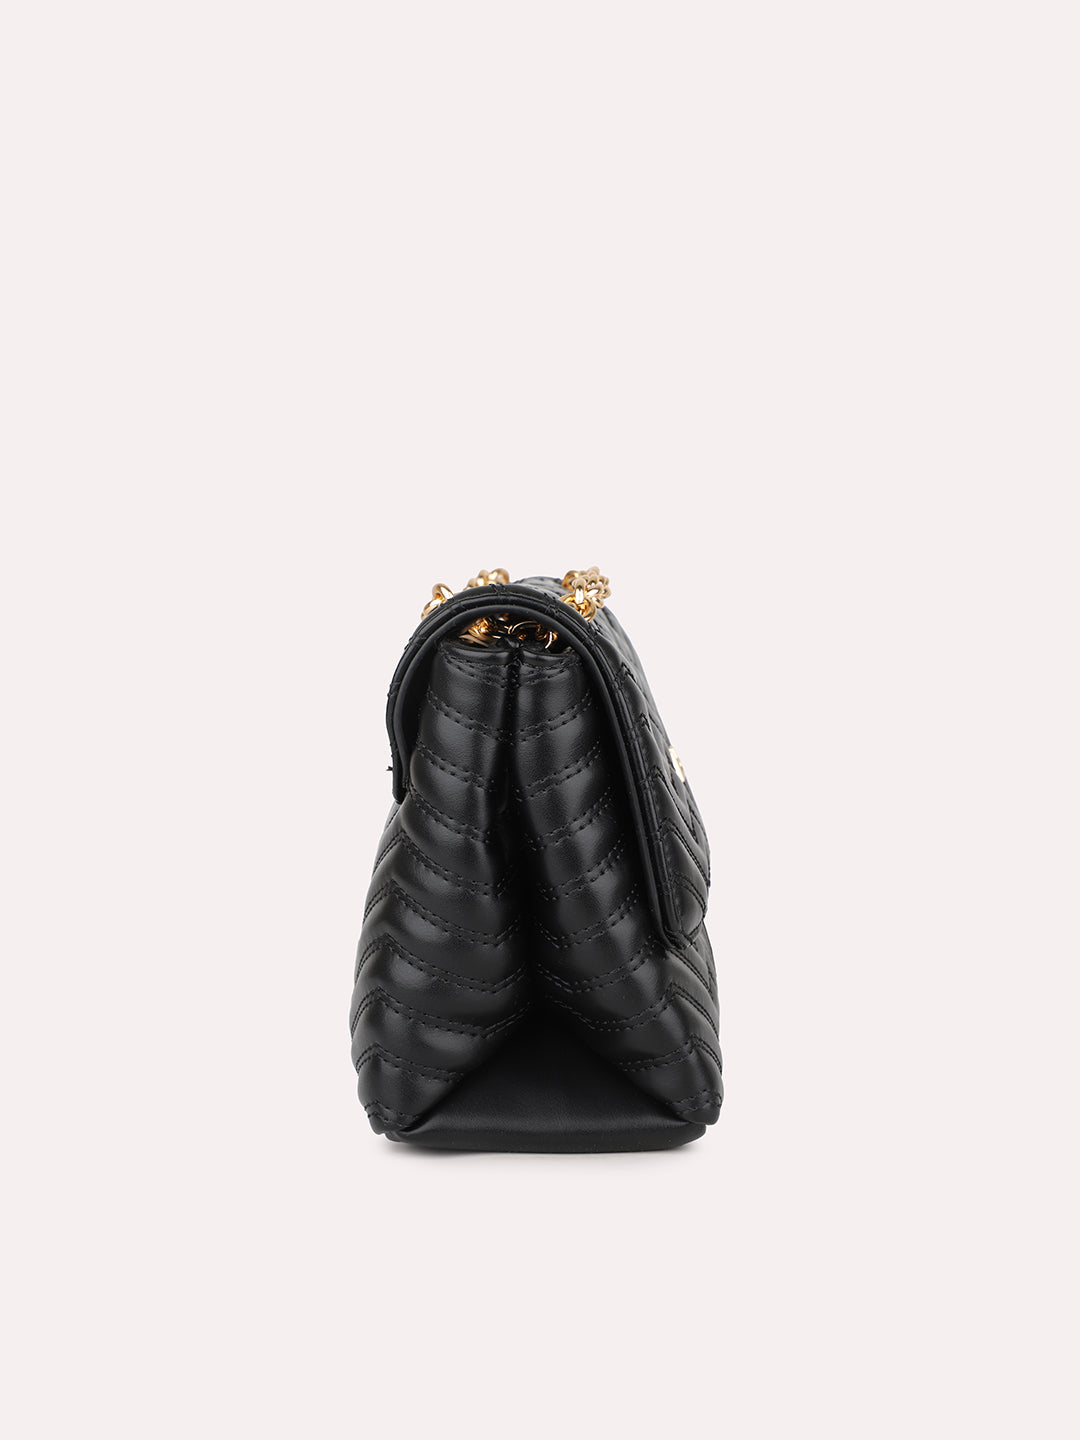 Textu Black Structured Chain Sling Bag With Quilted Detailing